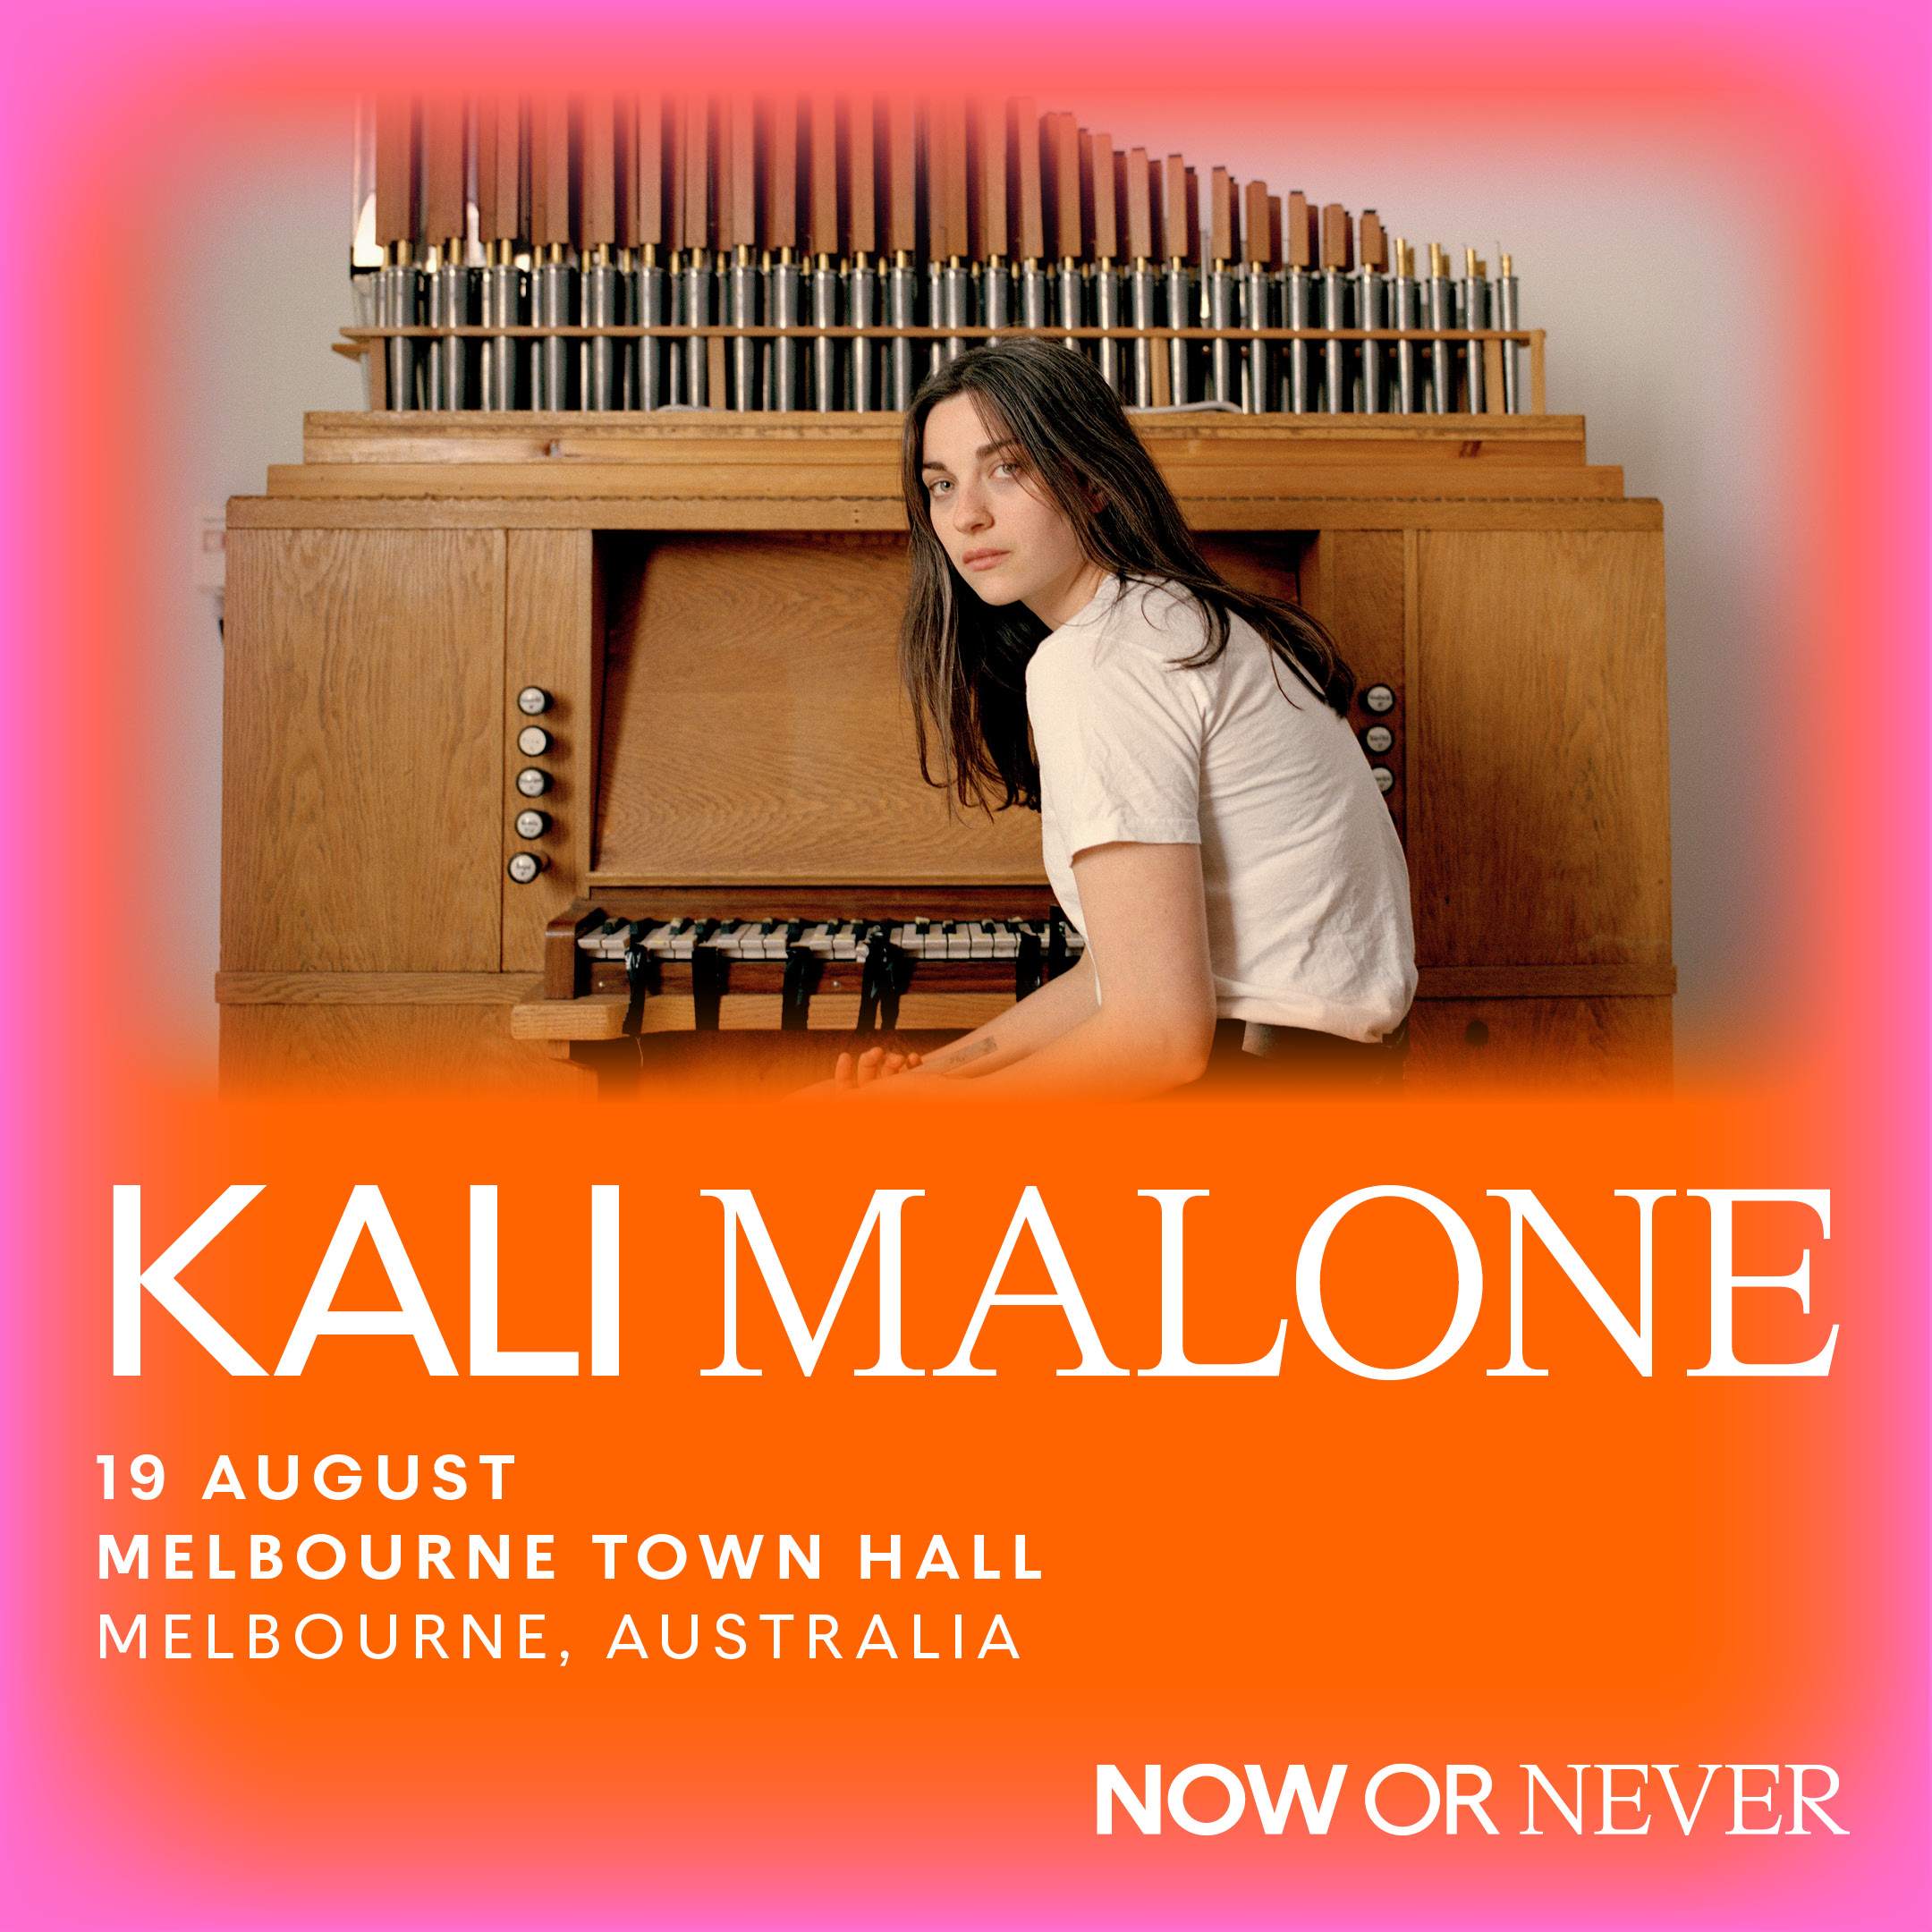 Kali Malone x Grand Organ + MESS Synthesiser Orchestra led by STATHIS//DAVEY//KIM - フライヤー表